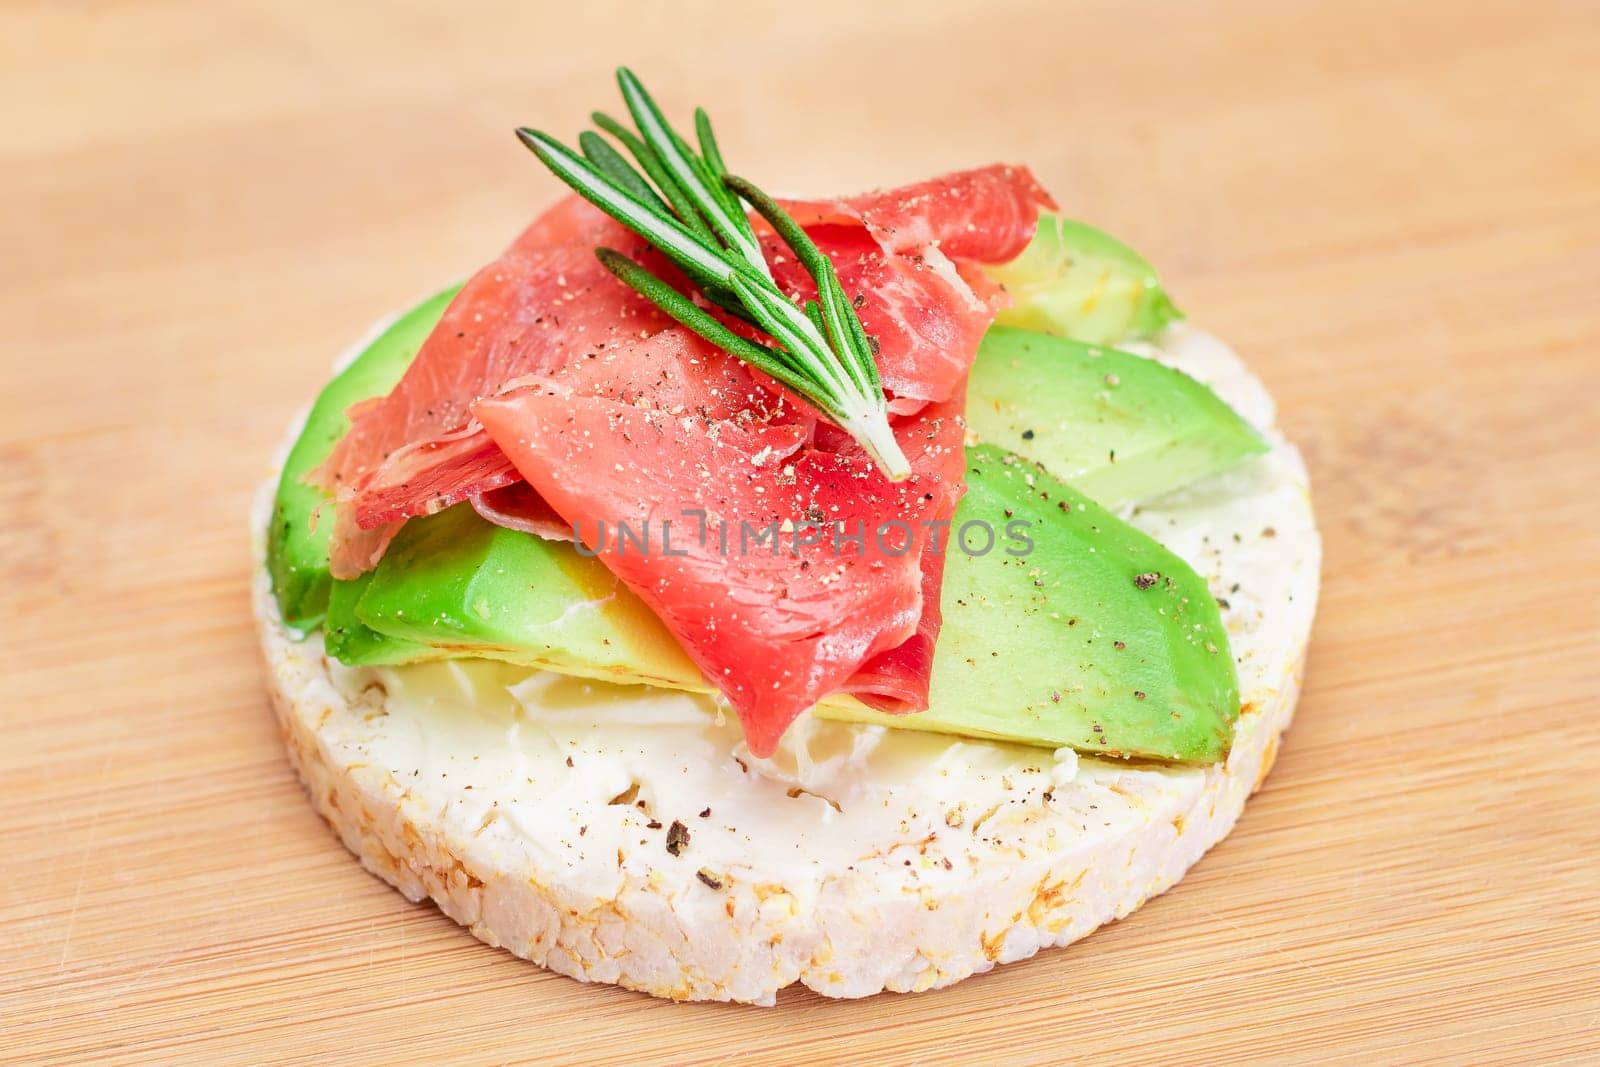 Rice Cake Sandwich with Fresh Avocado, Jamon and Rosemary on Bamboo Cutting Board. Easy Breakfast. Diet Food. Quick and Healthy Sandwiches. Crispbread with Tasty Filling. Healthy Dietary Snack